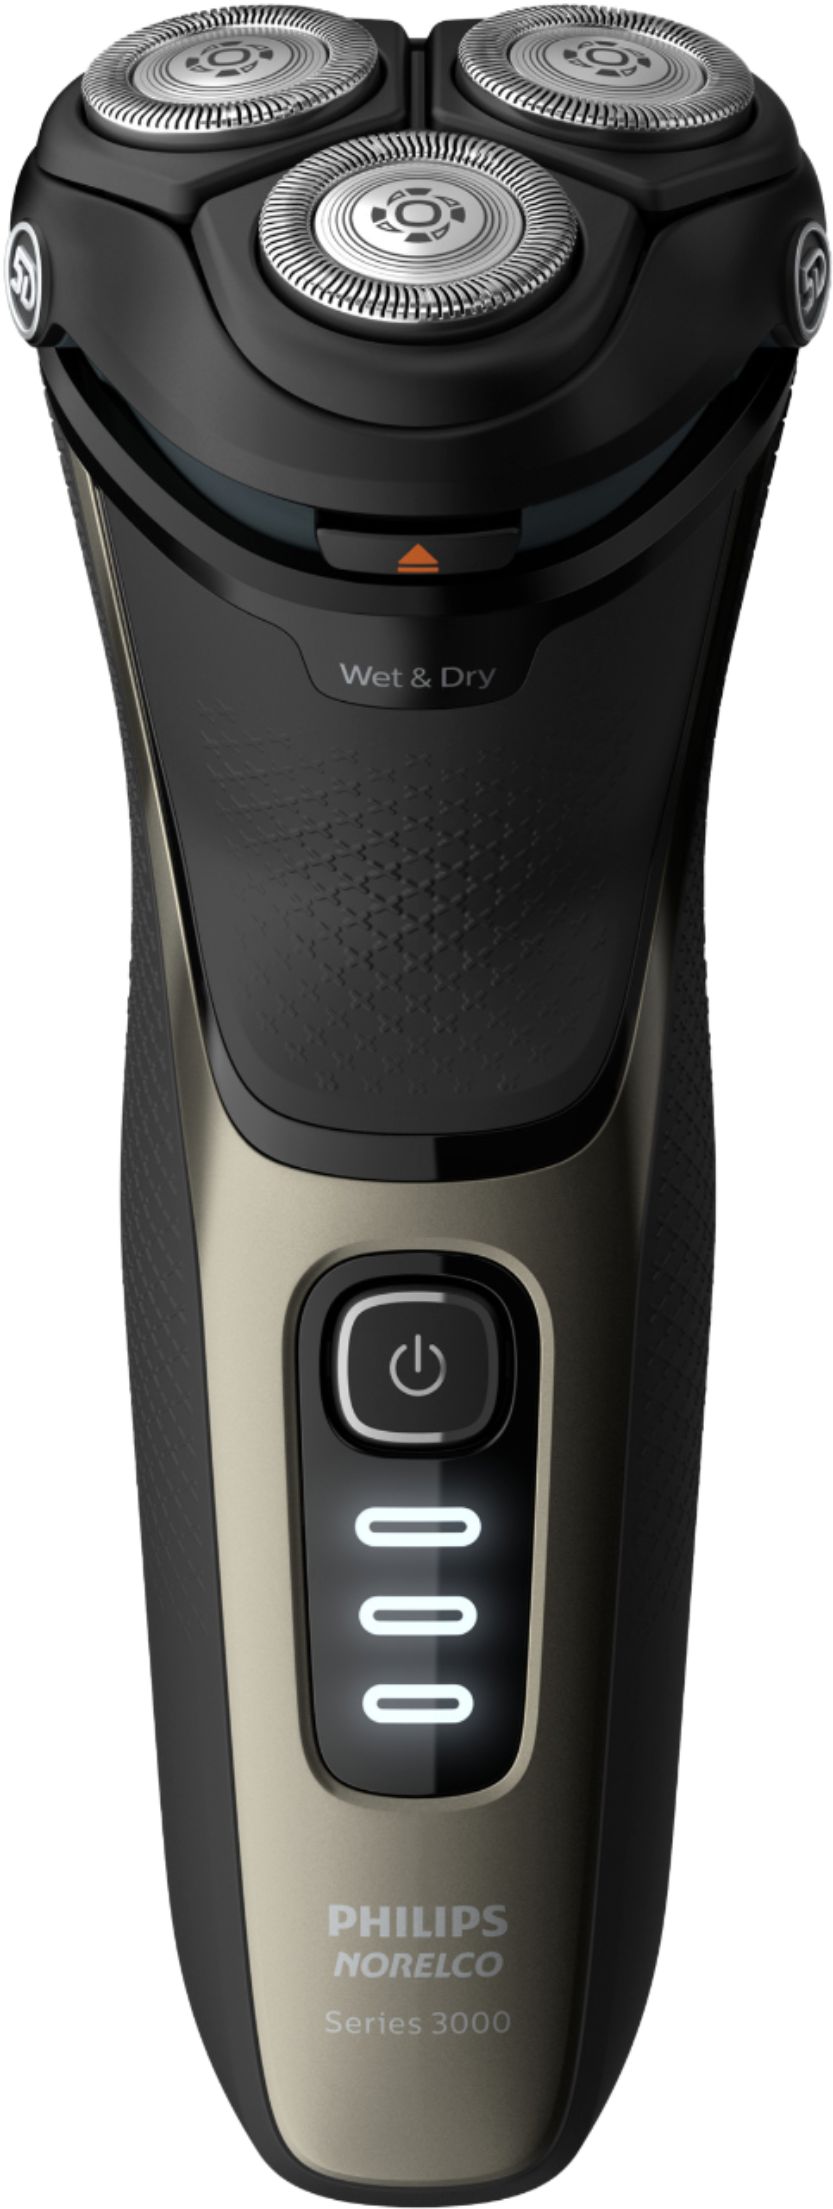 Angle View: Philips Norelco CareTouch, Rechargeable Wet & Dry Shaver with Pop-Up Trimmer, S3210/51 - Ash gold